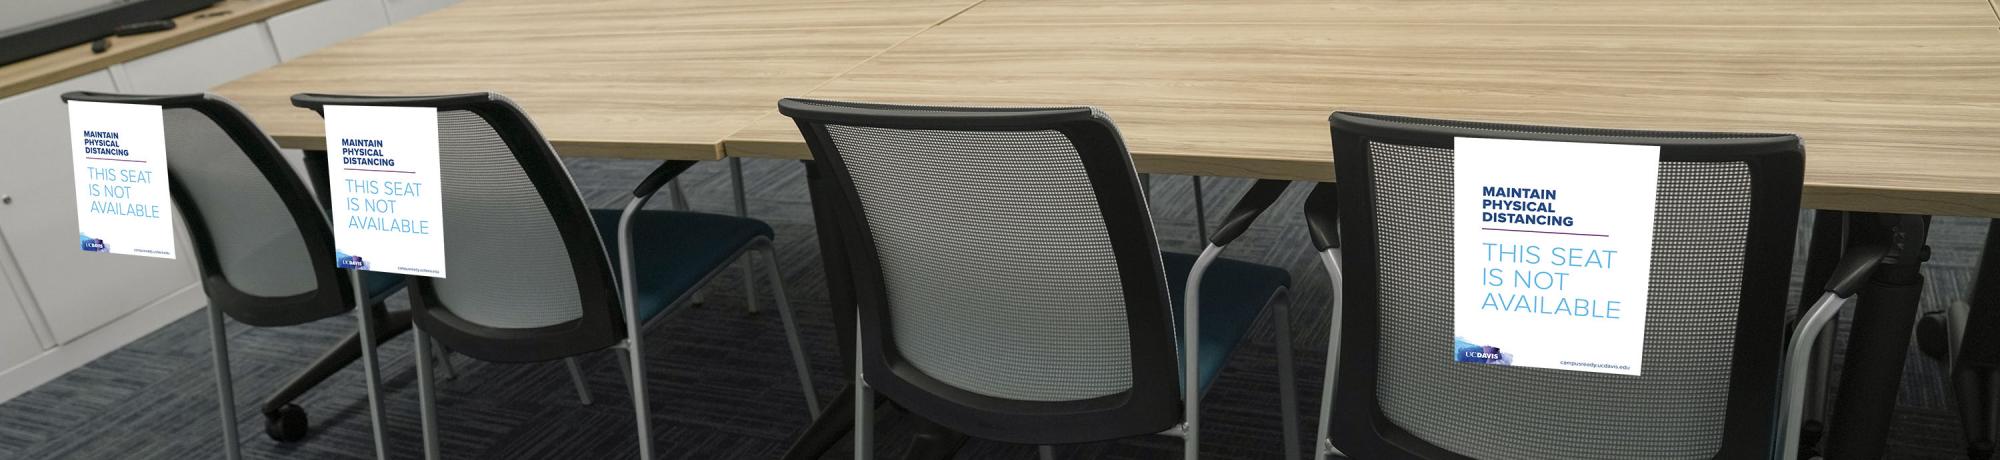 chairs in conference room with signs, "Maintain physical distancing: This seat is not available"